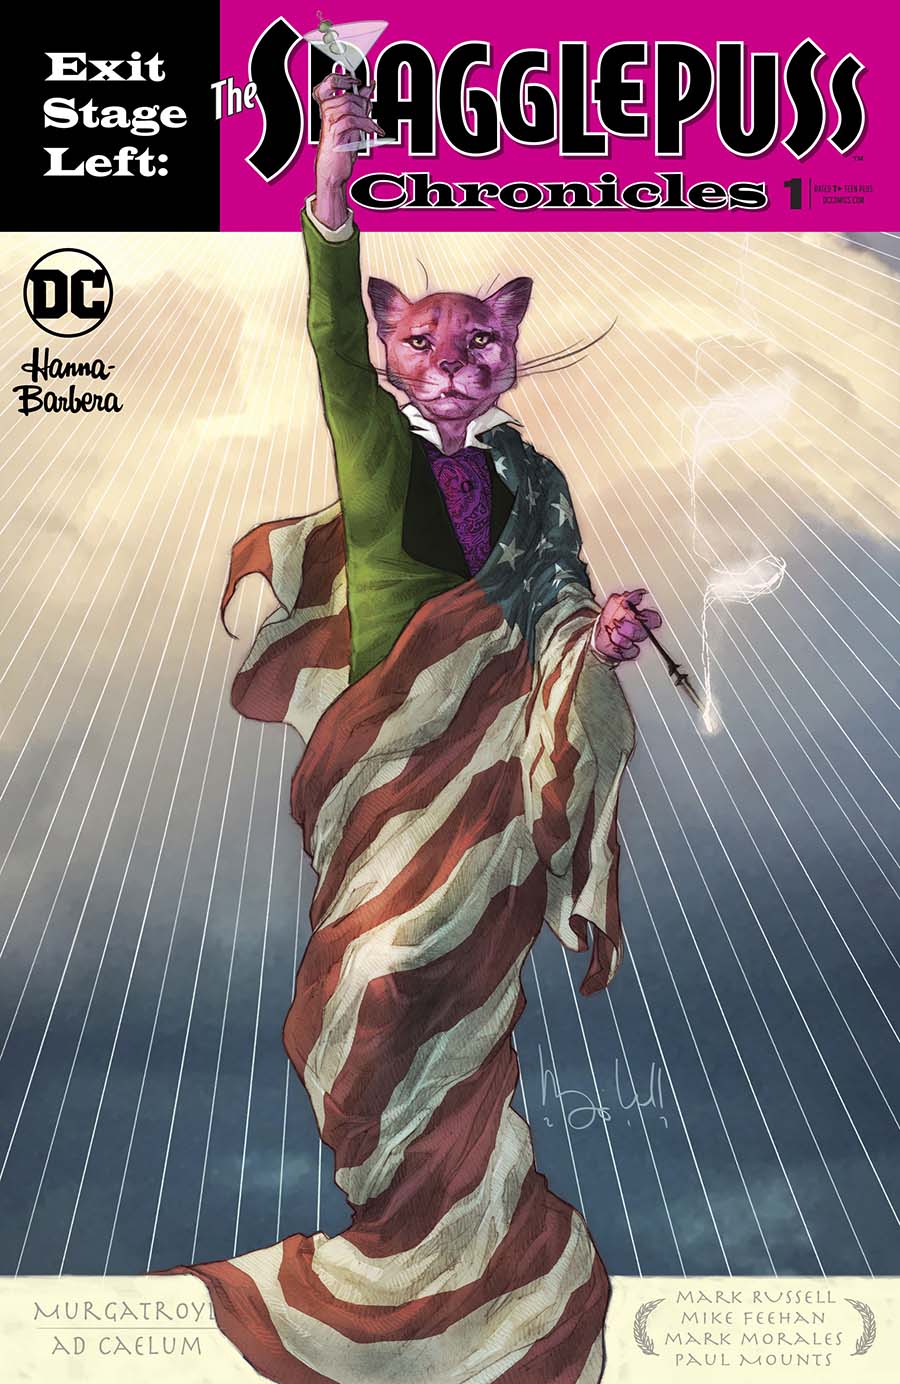 Exit Stage Left The Snagglepuss Chronicles #1 Cover A Regular Ben Caldwell Cover